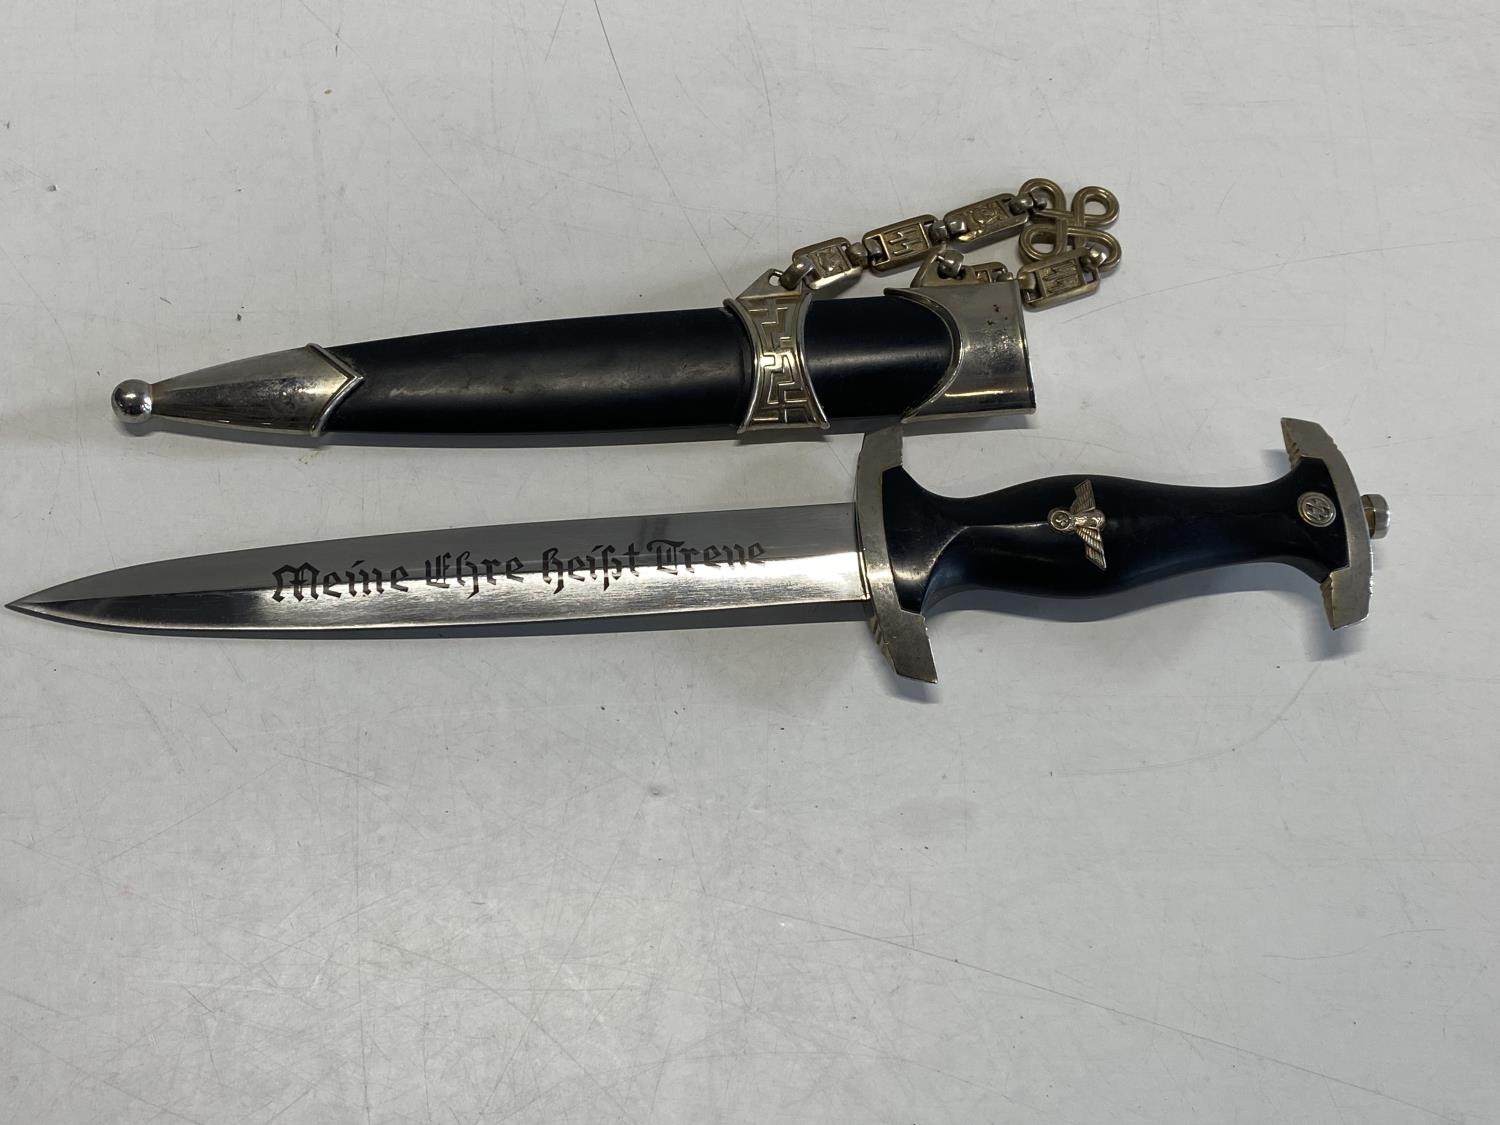 A reproduction German third Reich dagger and sheath, over 18's only, UK post only - Image 2 of 2